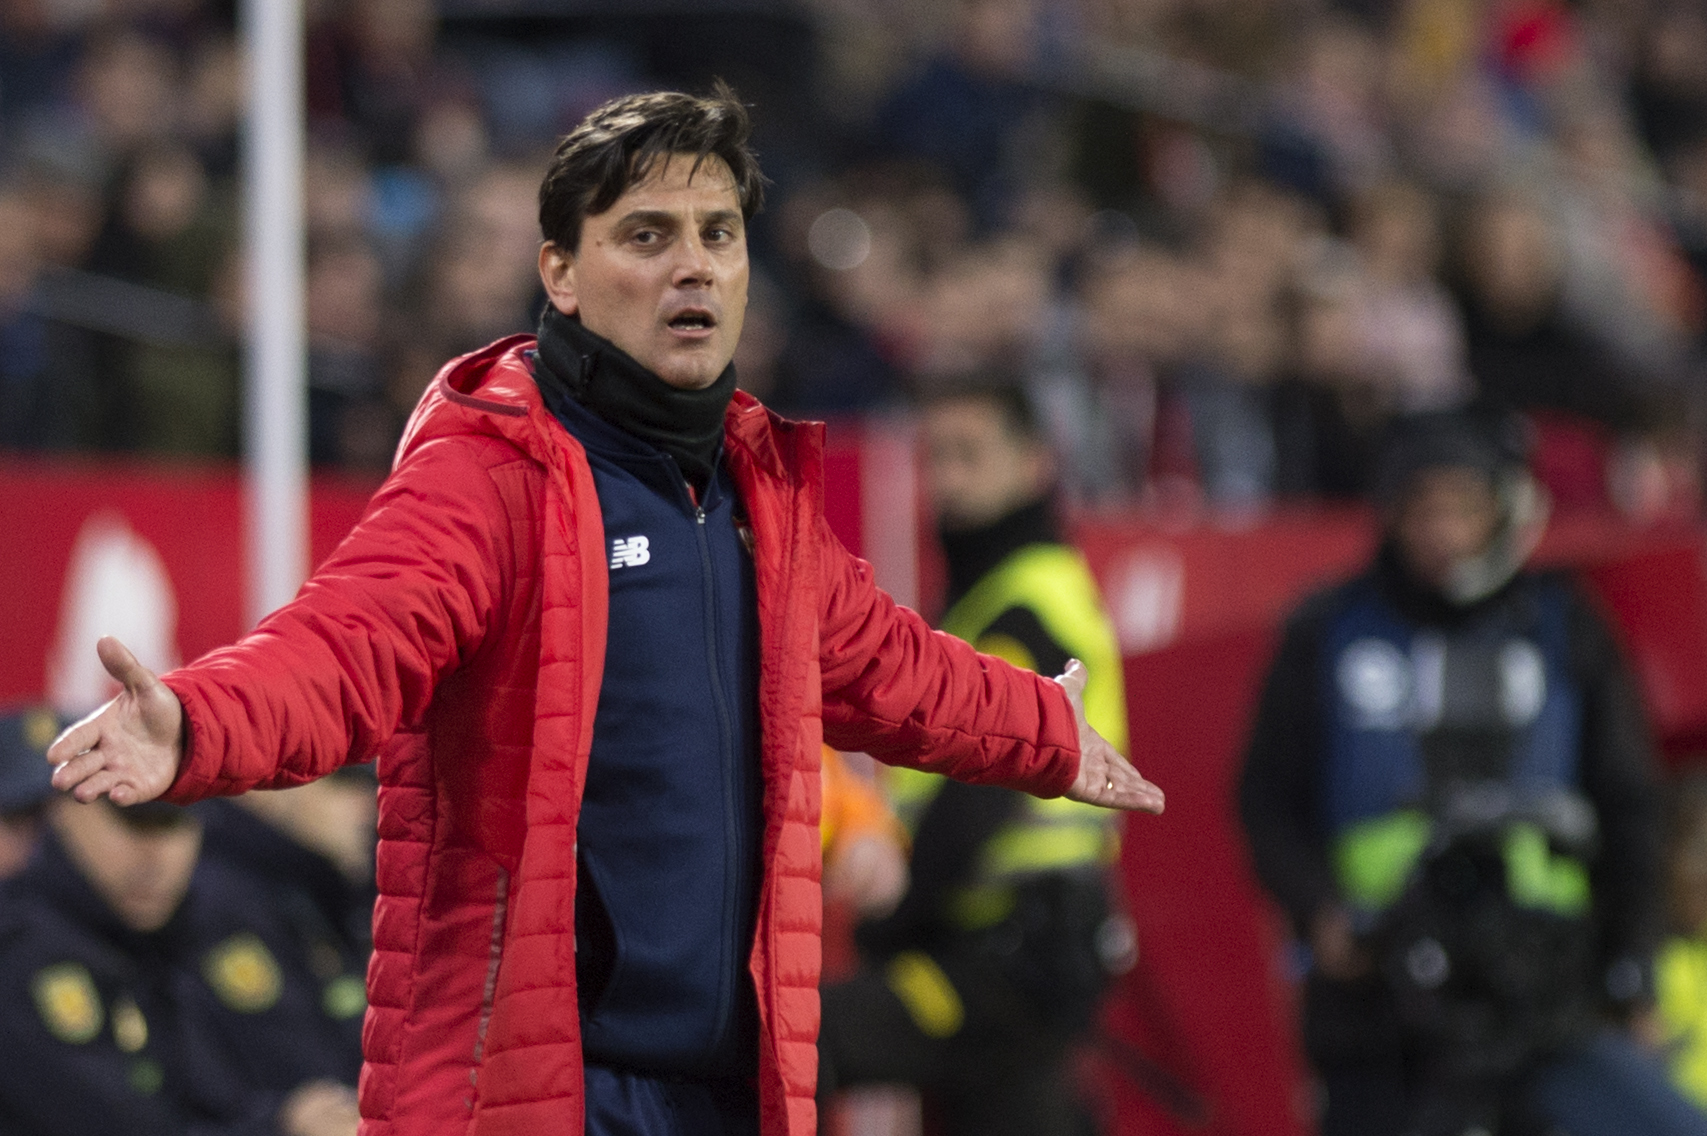 Sevilla's Italian coach Vincenzo Montella gestures during the Spanish league football match between FC Barcelona and Deportivo Alaves at the Camp Nou stadium in Barcelona on January 28, 2018. / AFP PHOTO / JORGE GUERRERO        (Photo credit should read JORGE GUERRERO/AFP/Getty Images)